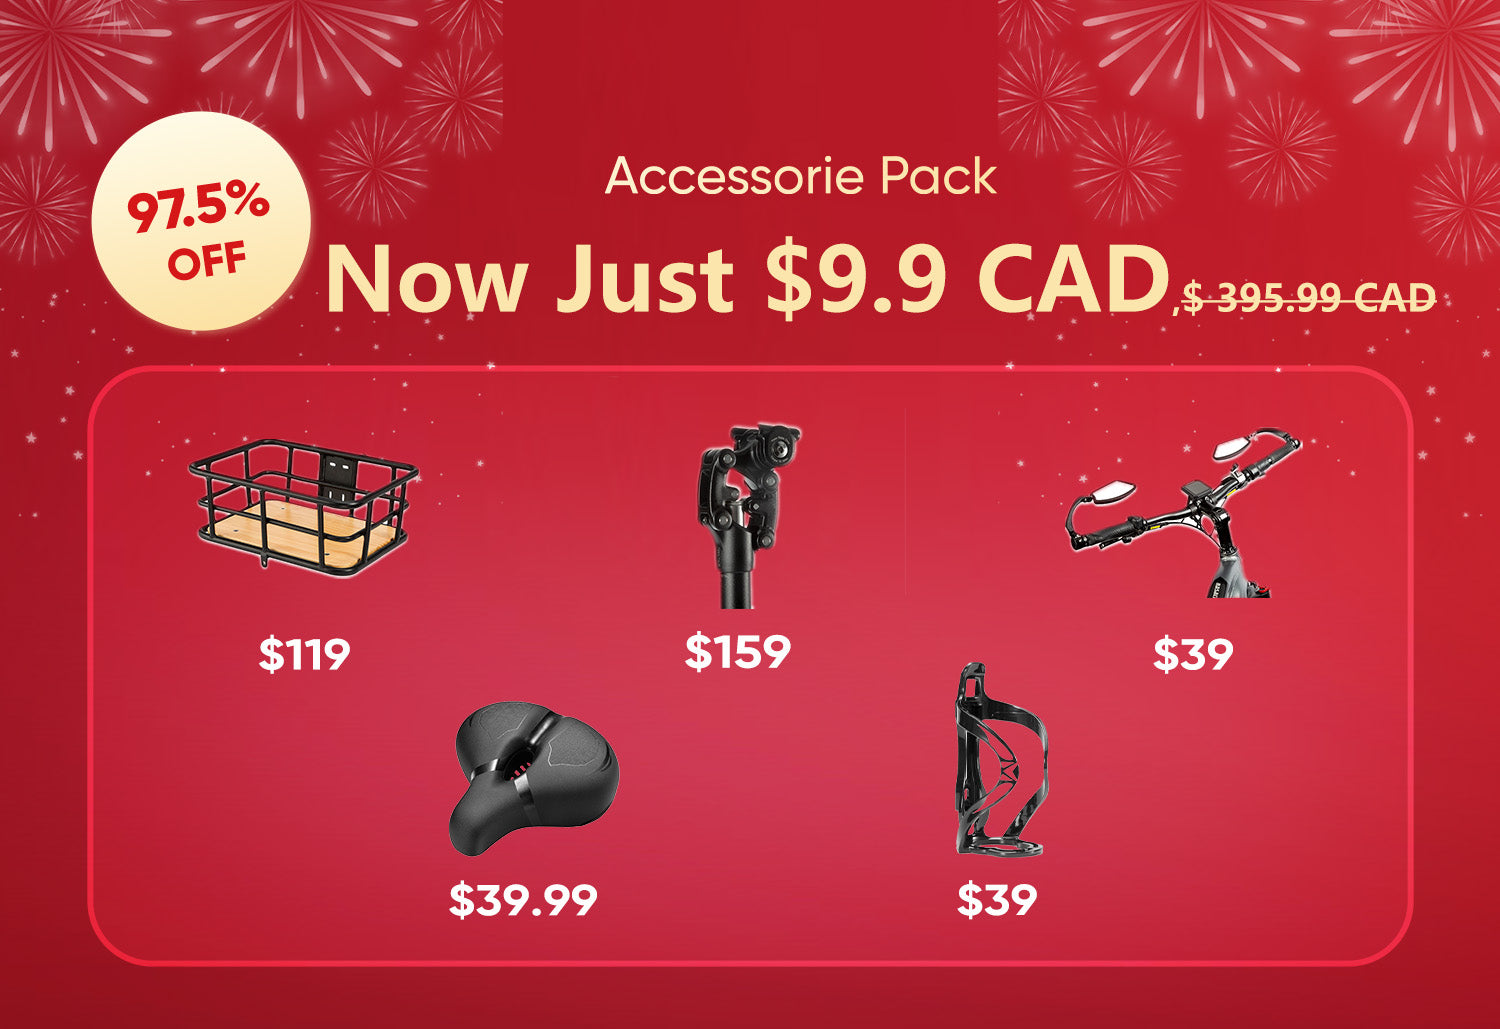 Receive Over $395CAD Worth of Accessories on Any Ebike